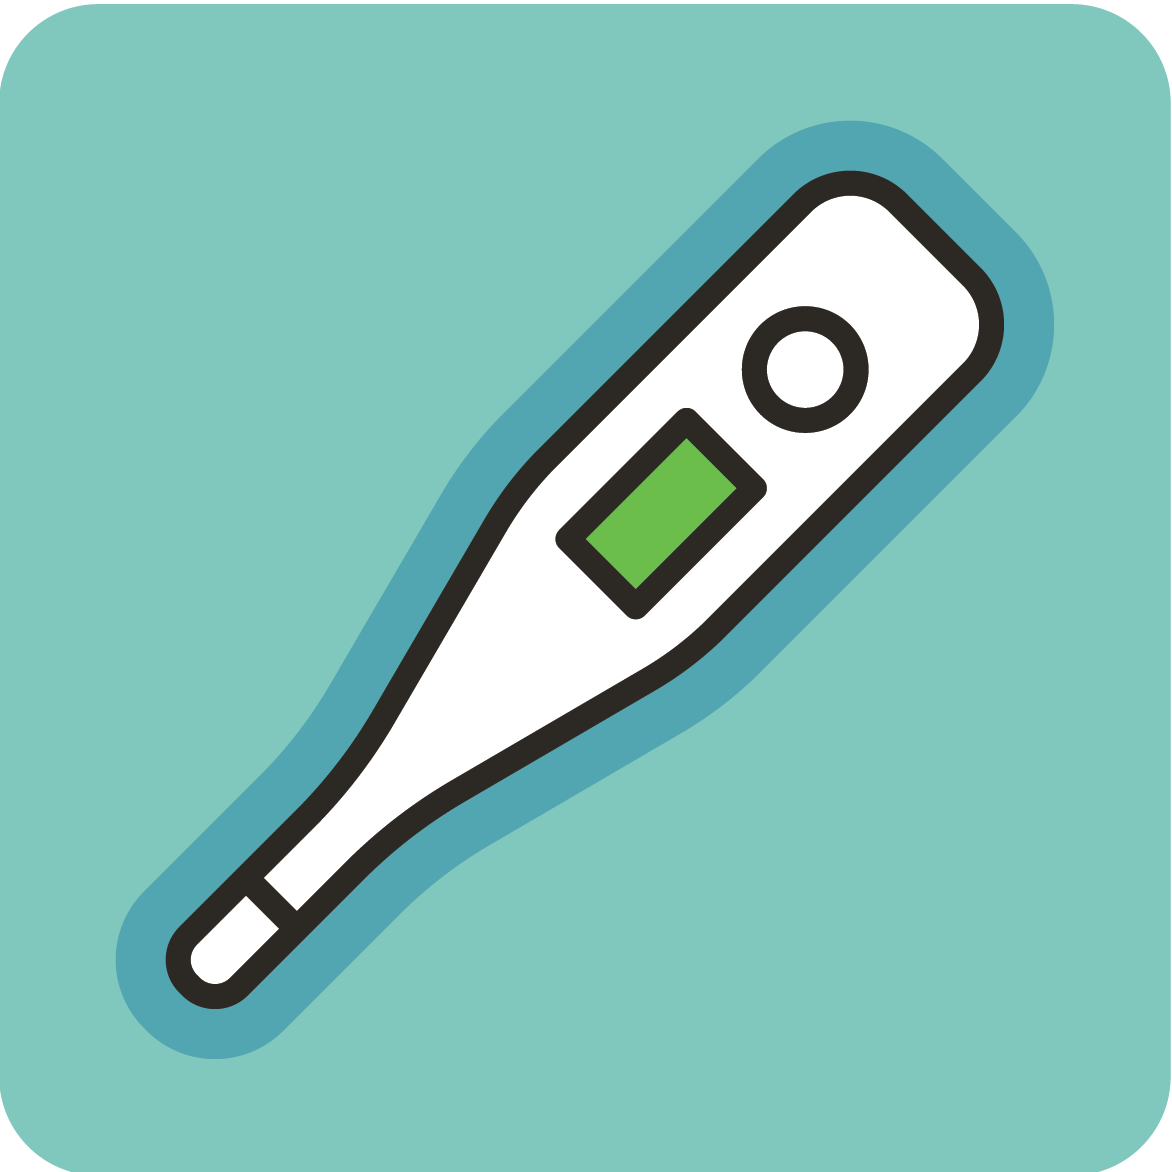 Thermometer icon - assess your health